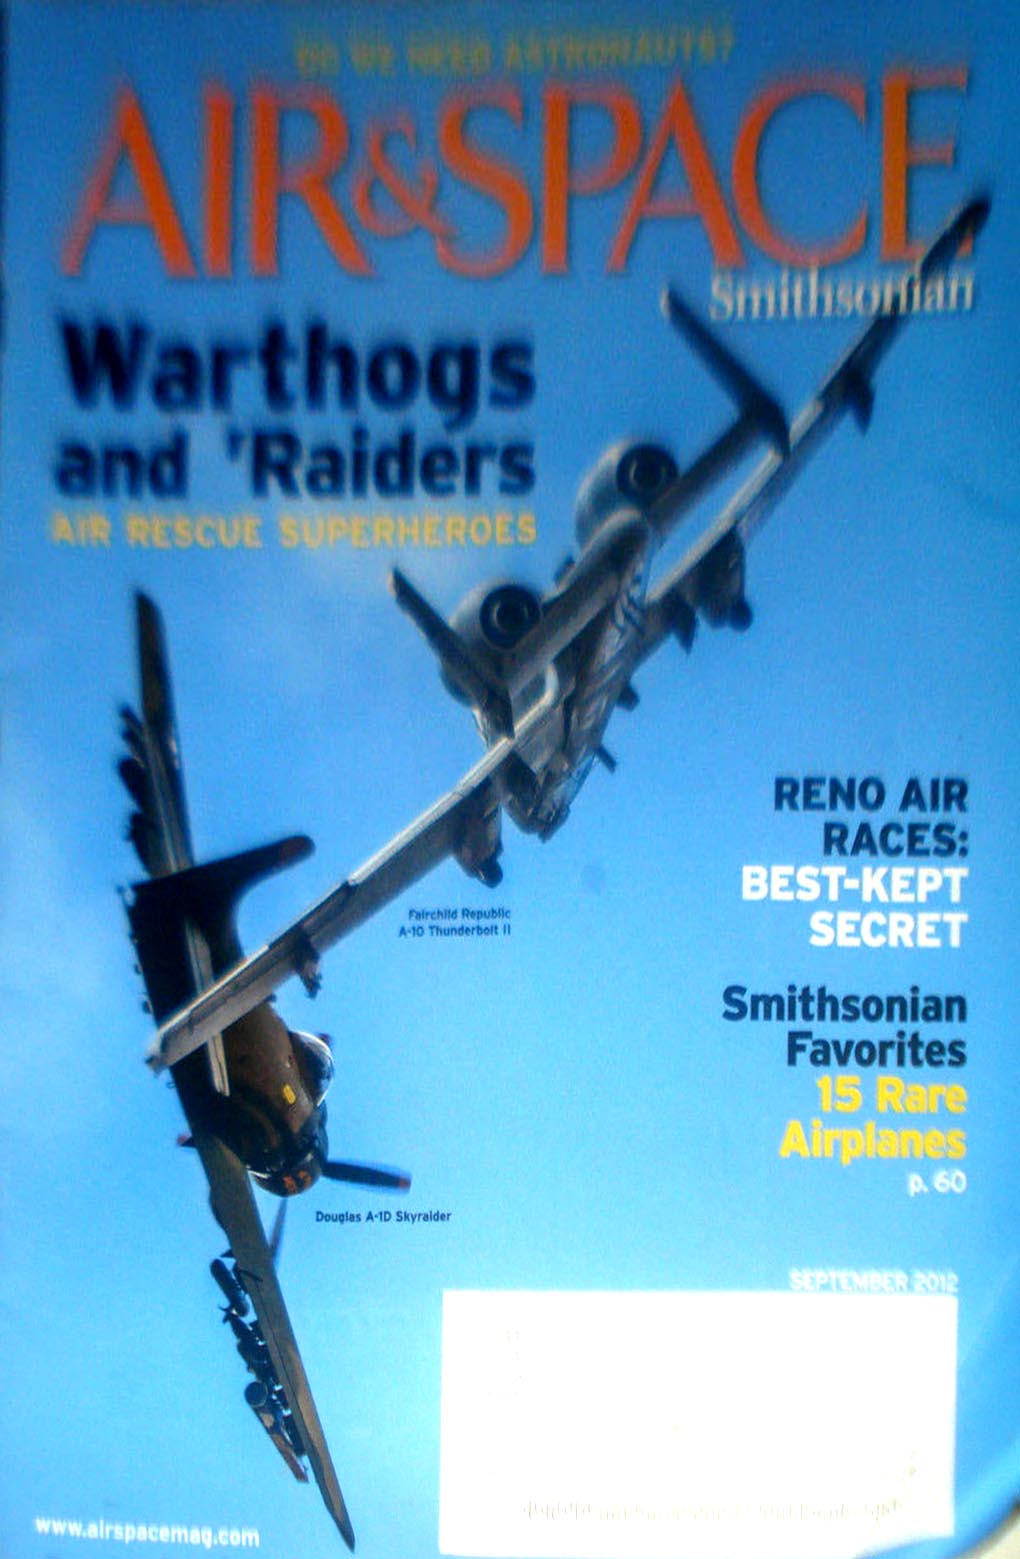 Air & Space September 2012 magazine back issue Air & Space magizine back copy 